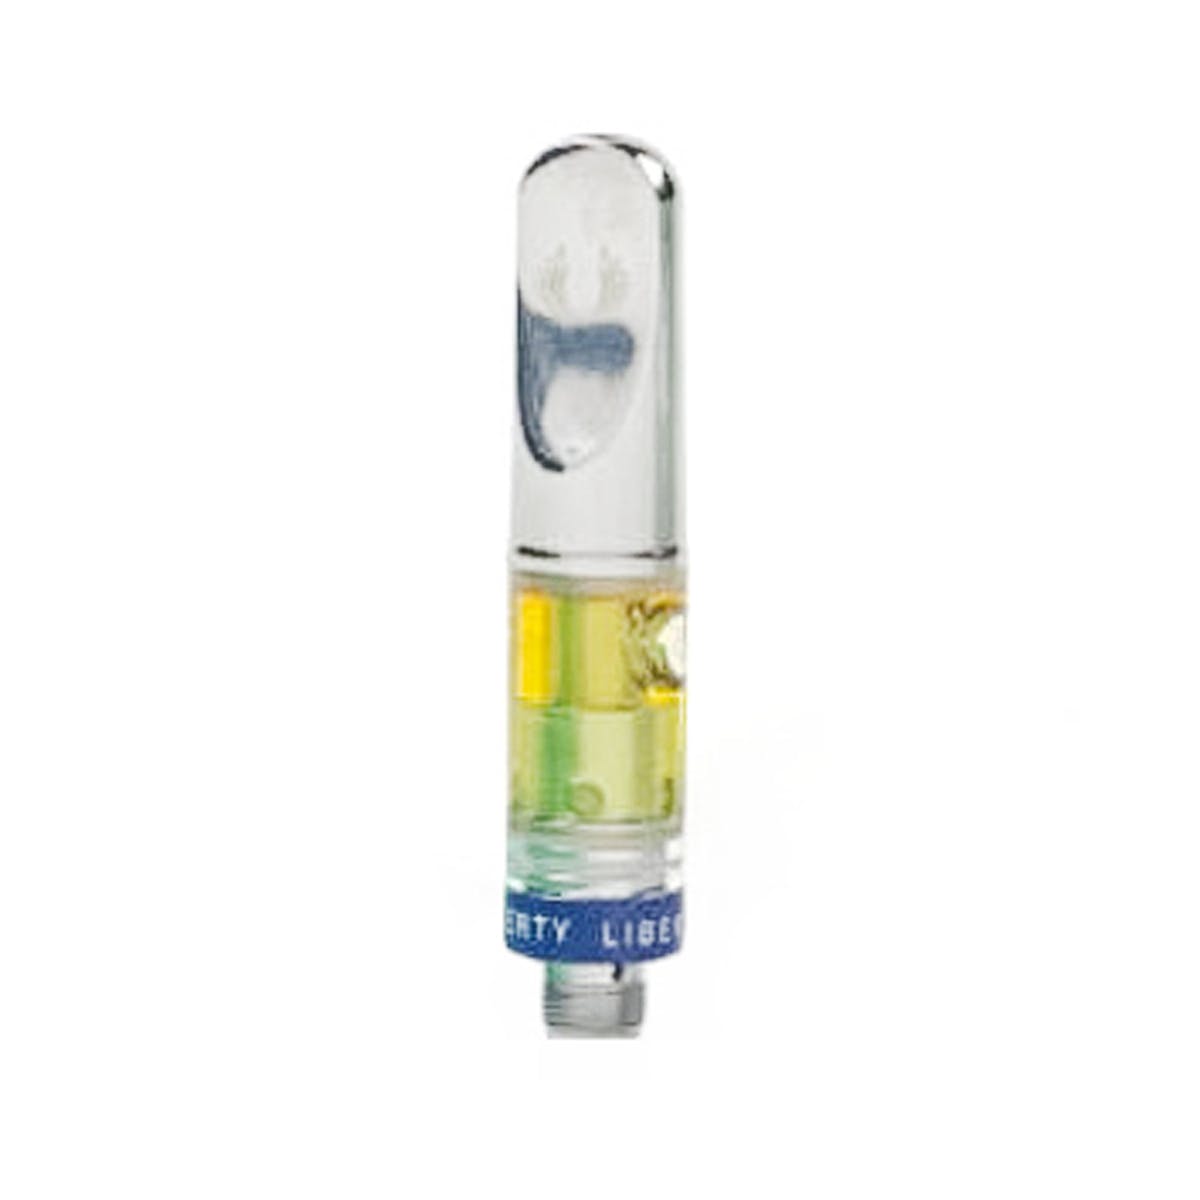 concentrate-liberty-tranquility-oil-cartridge